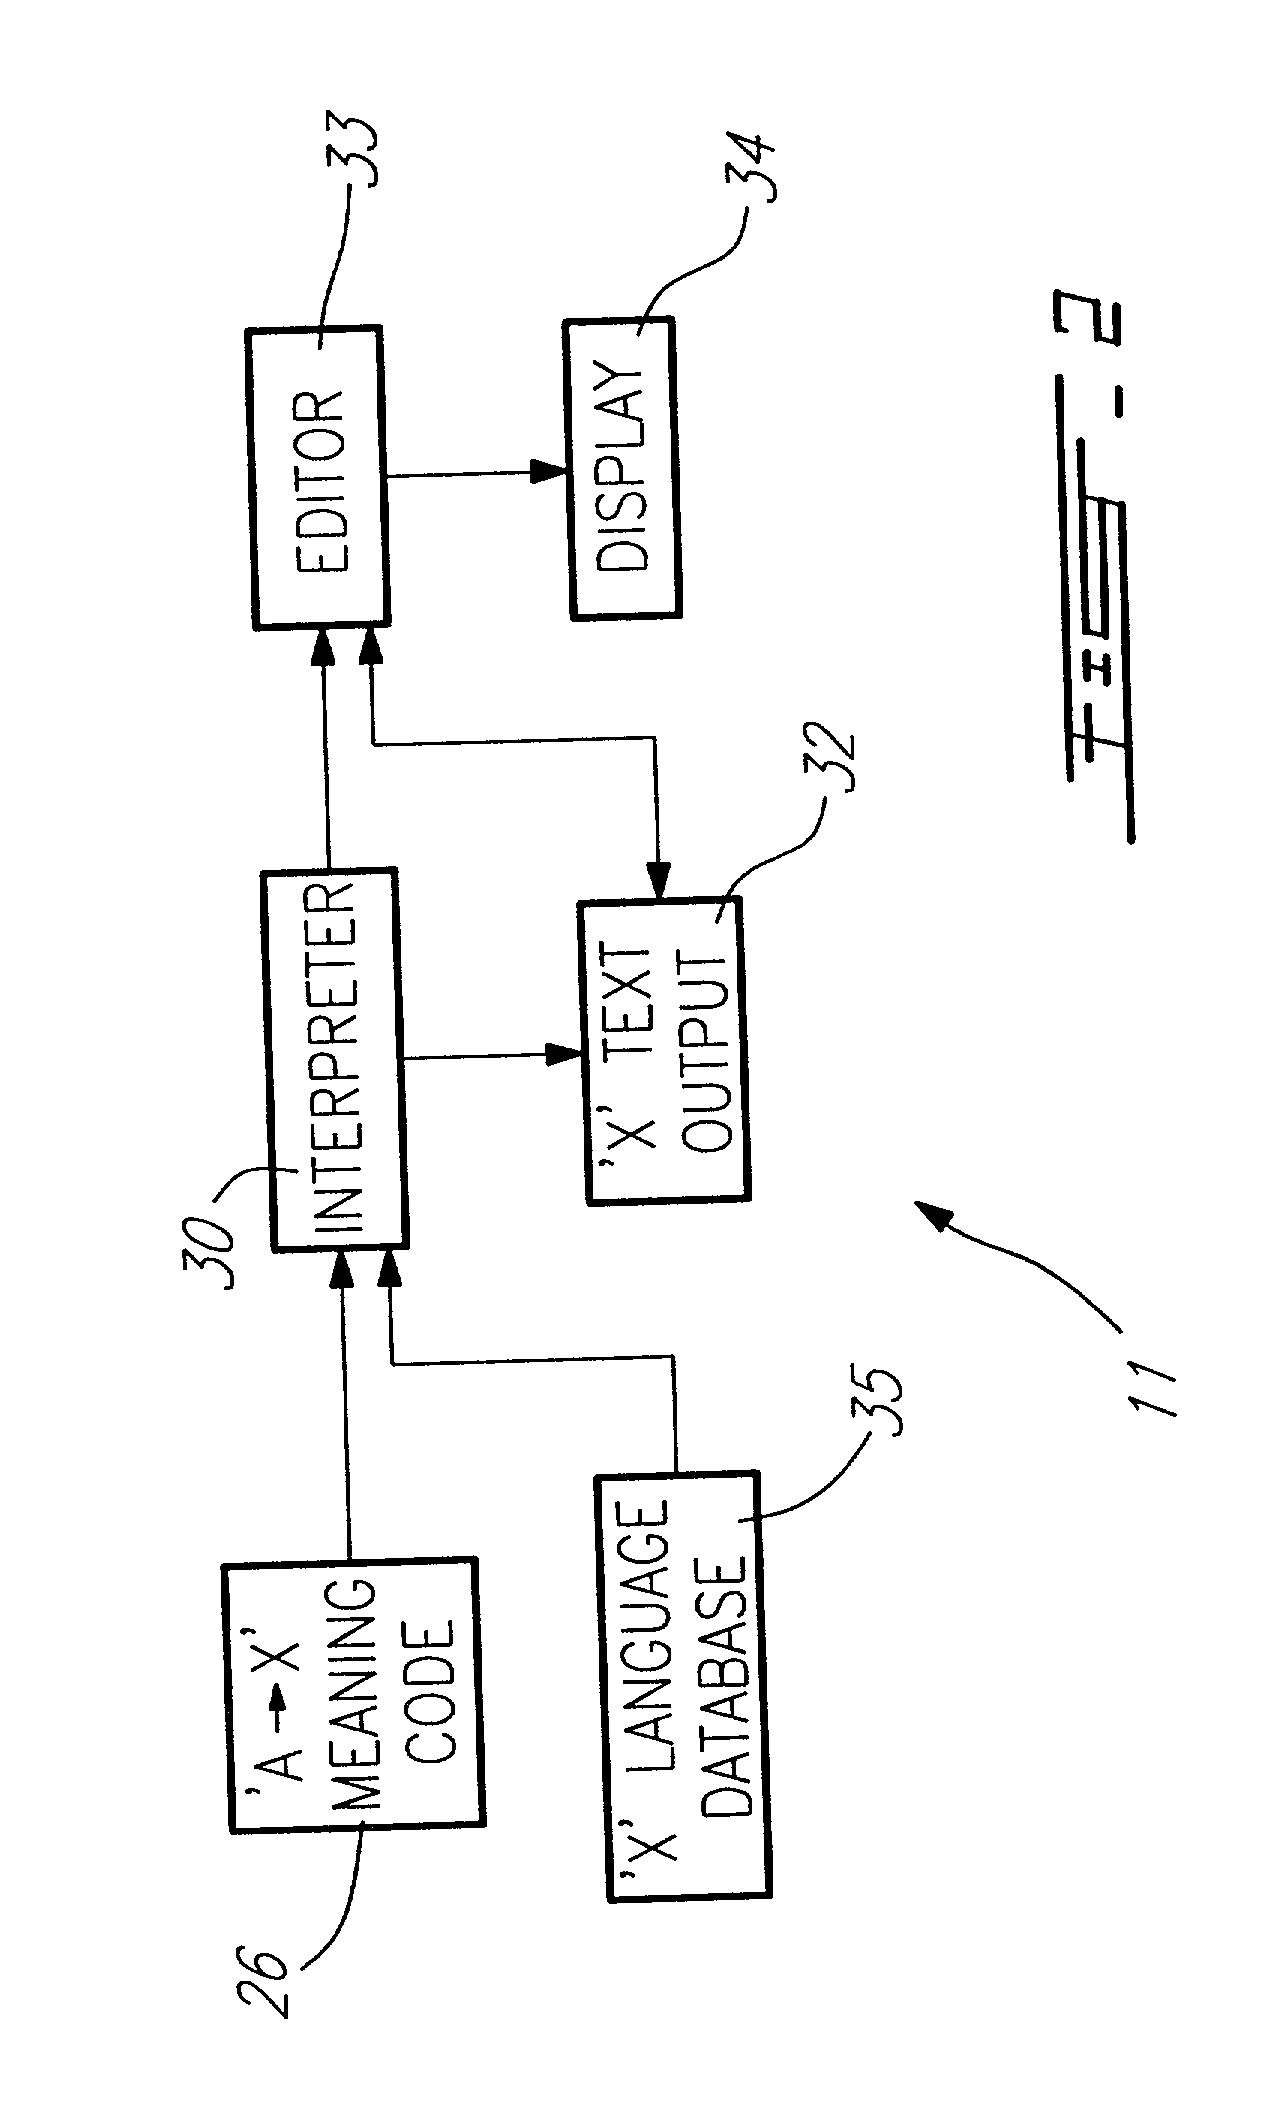 Operator-assisted translation system and method for unconstrained source text